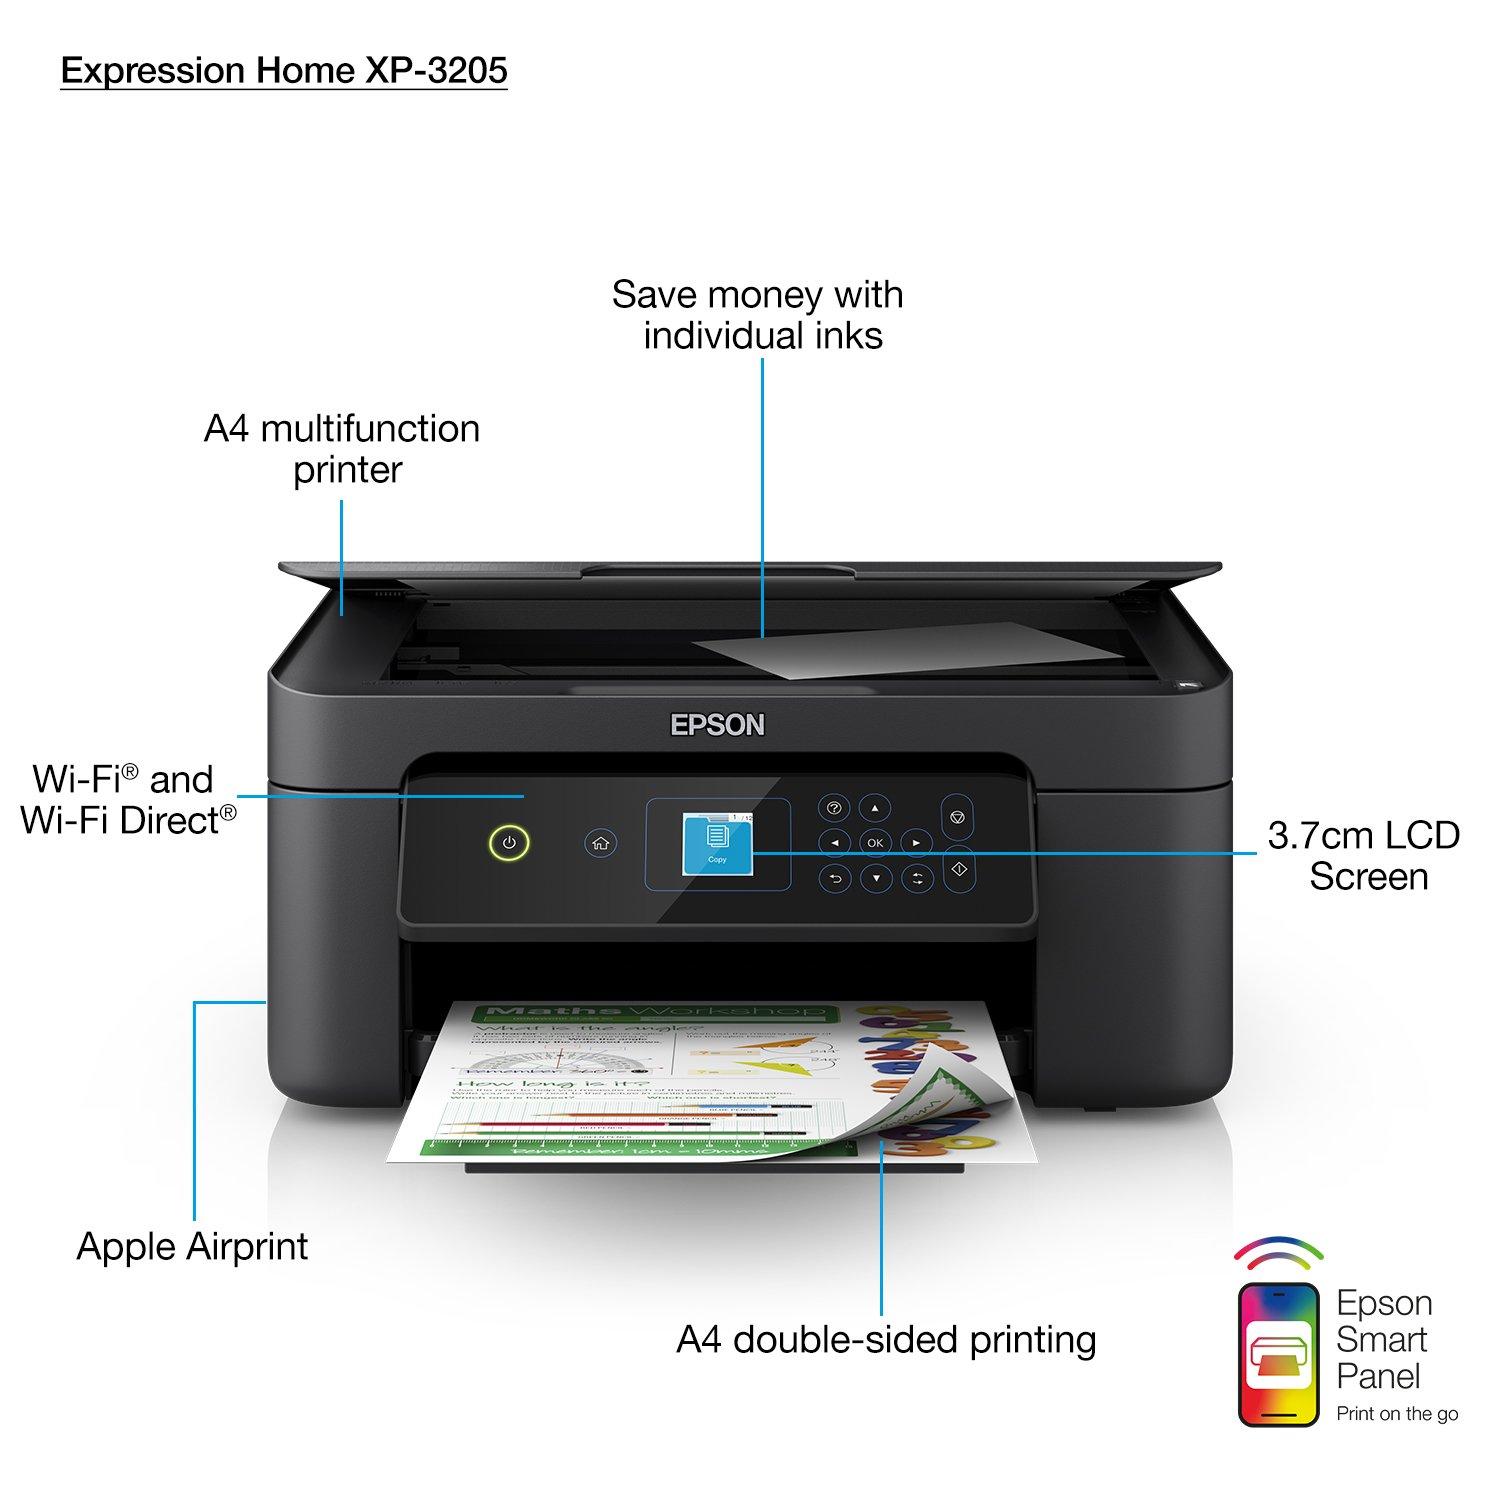 Europe | Consumer Expression Inkjet | | Printers | Products Home | Printers XP-3205 Epson